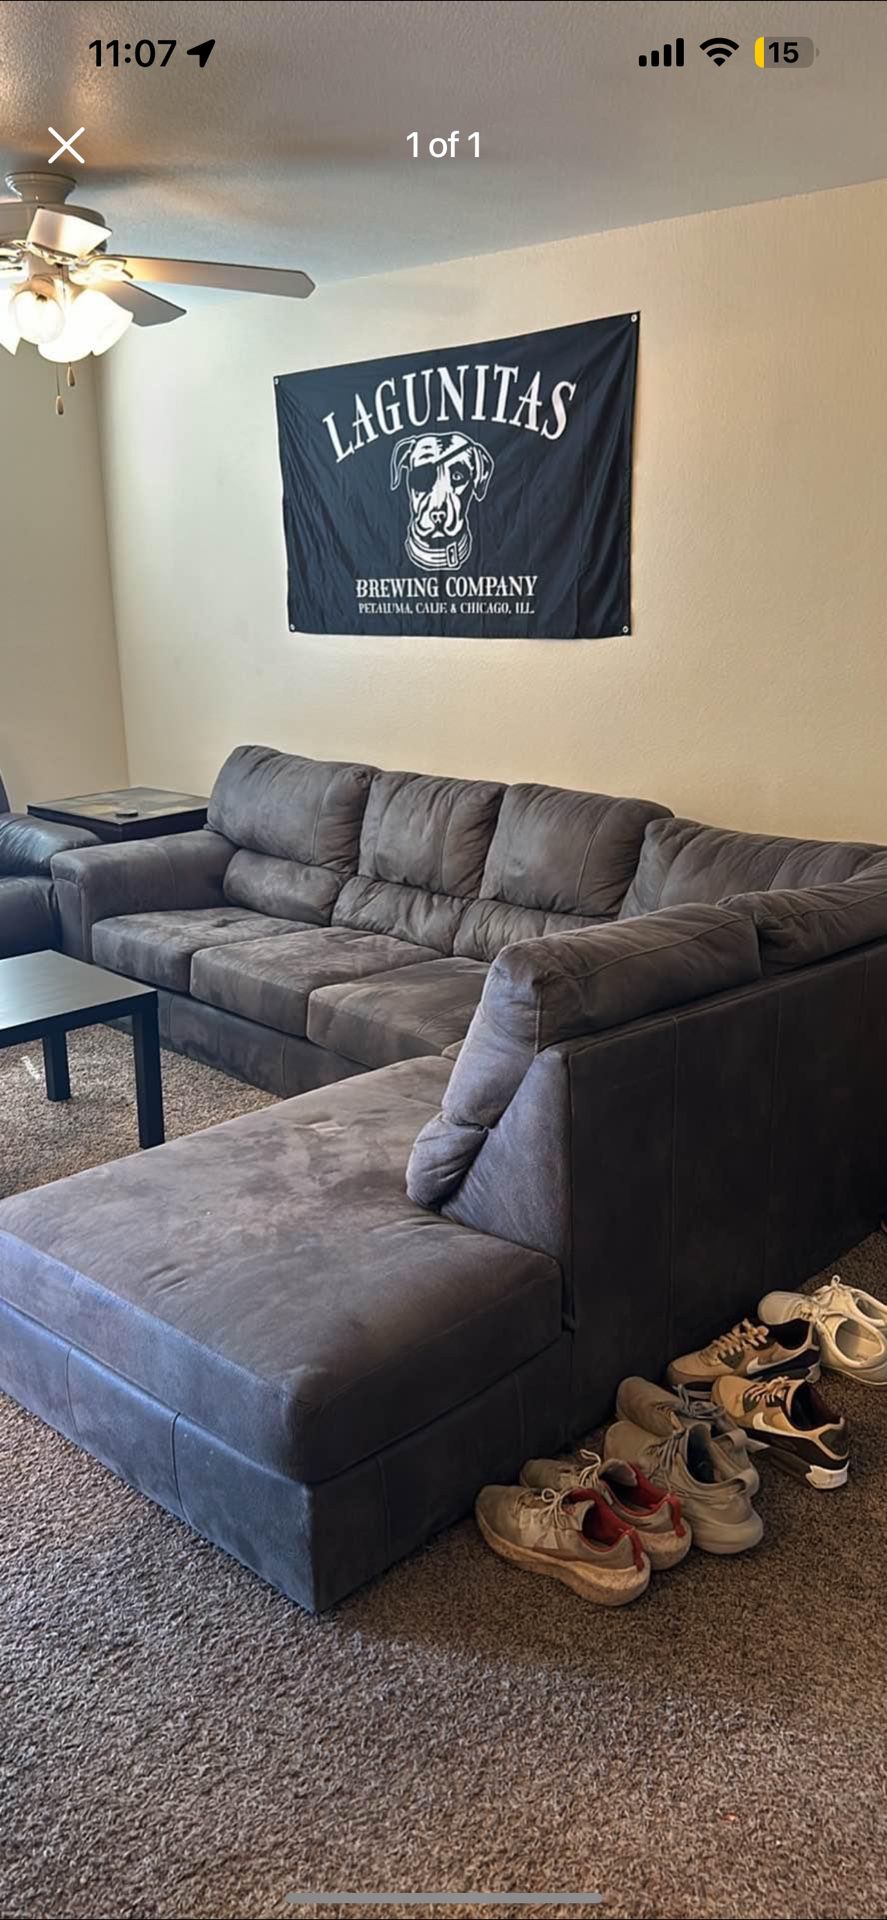 Sectional Sofa/Couch